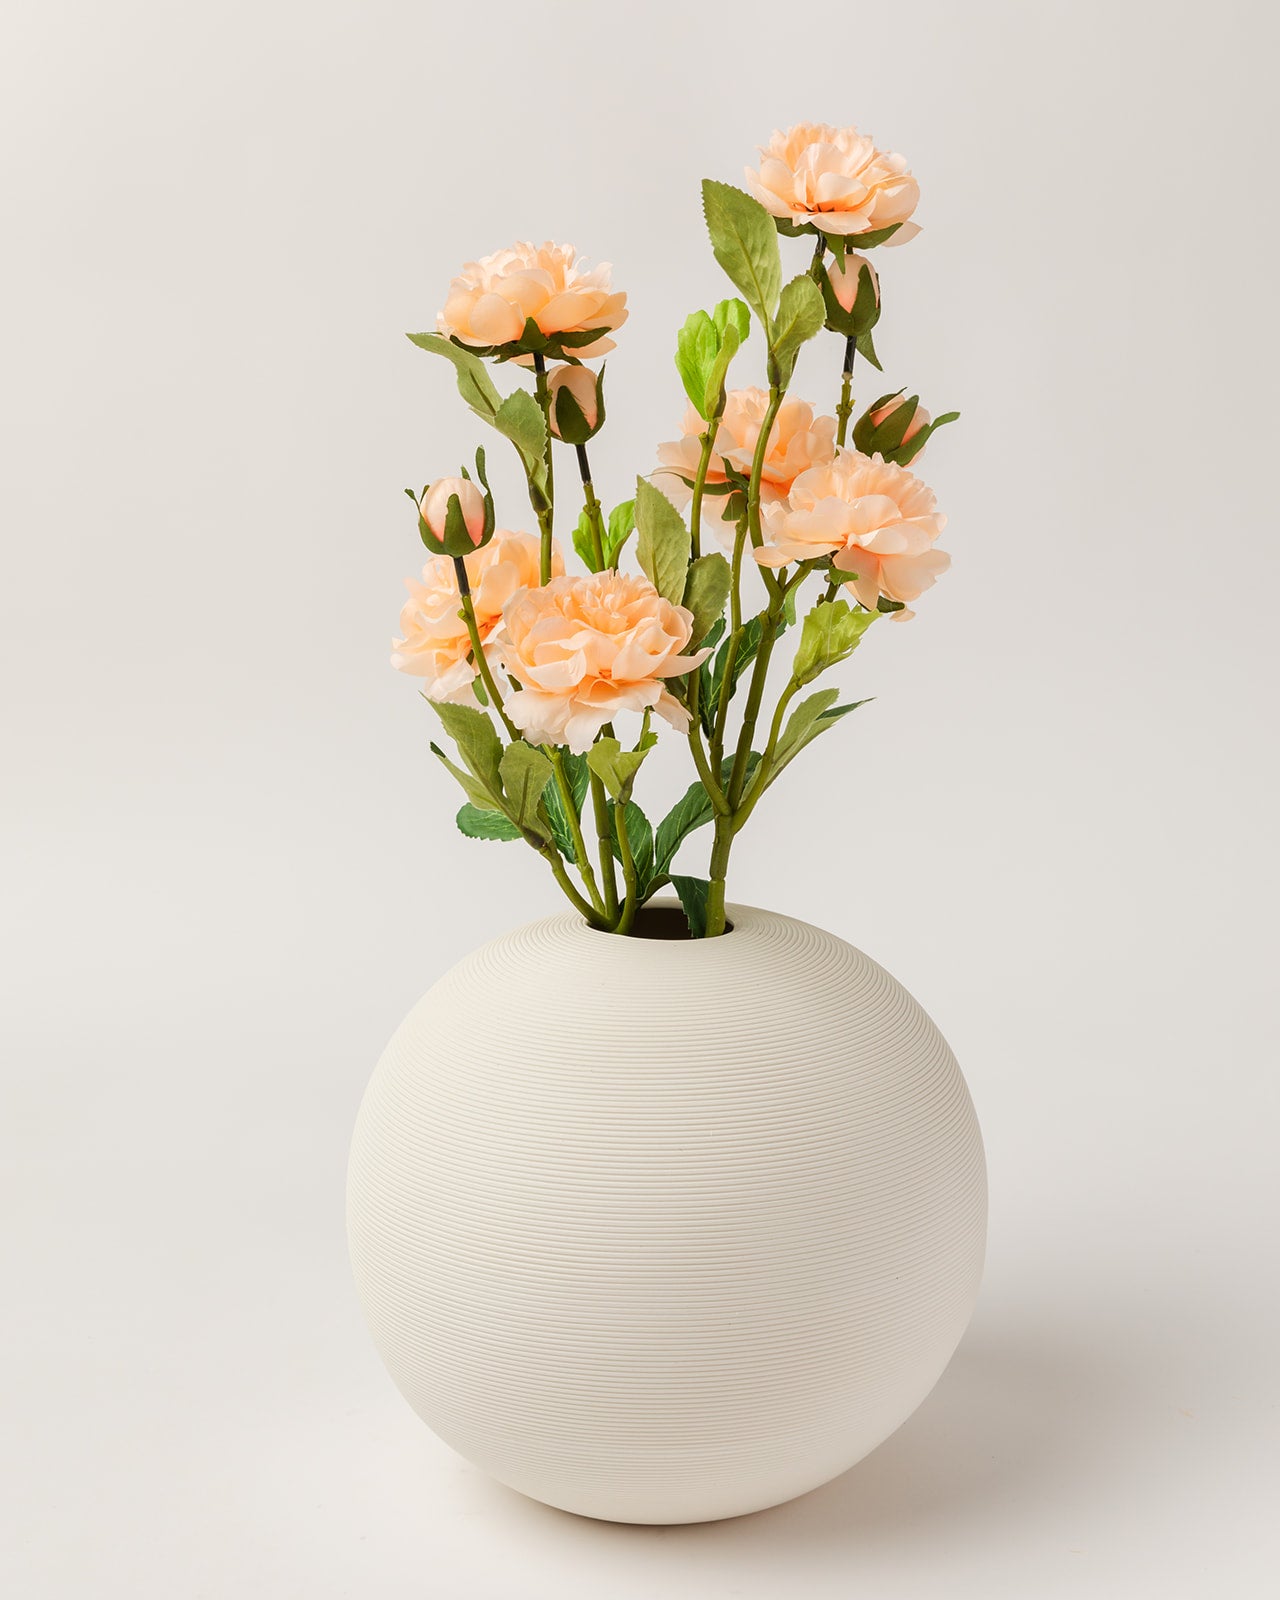 Ball Vase with Peonies